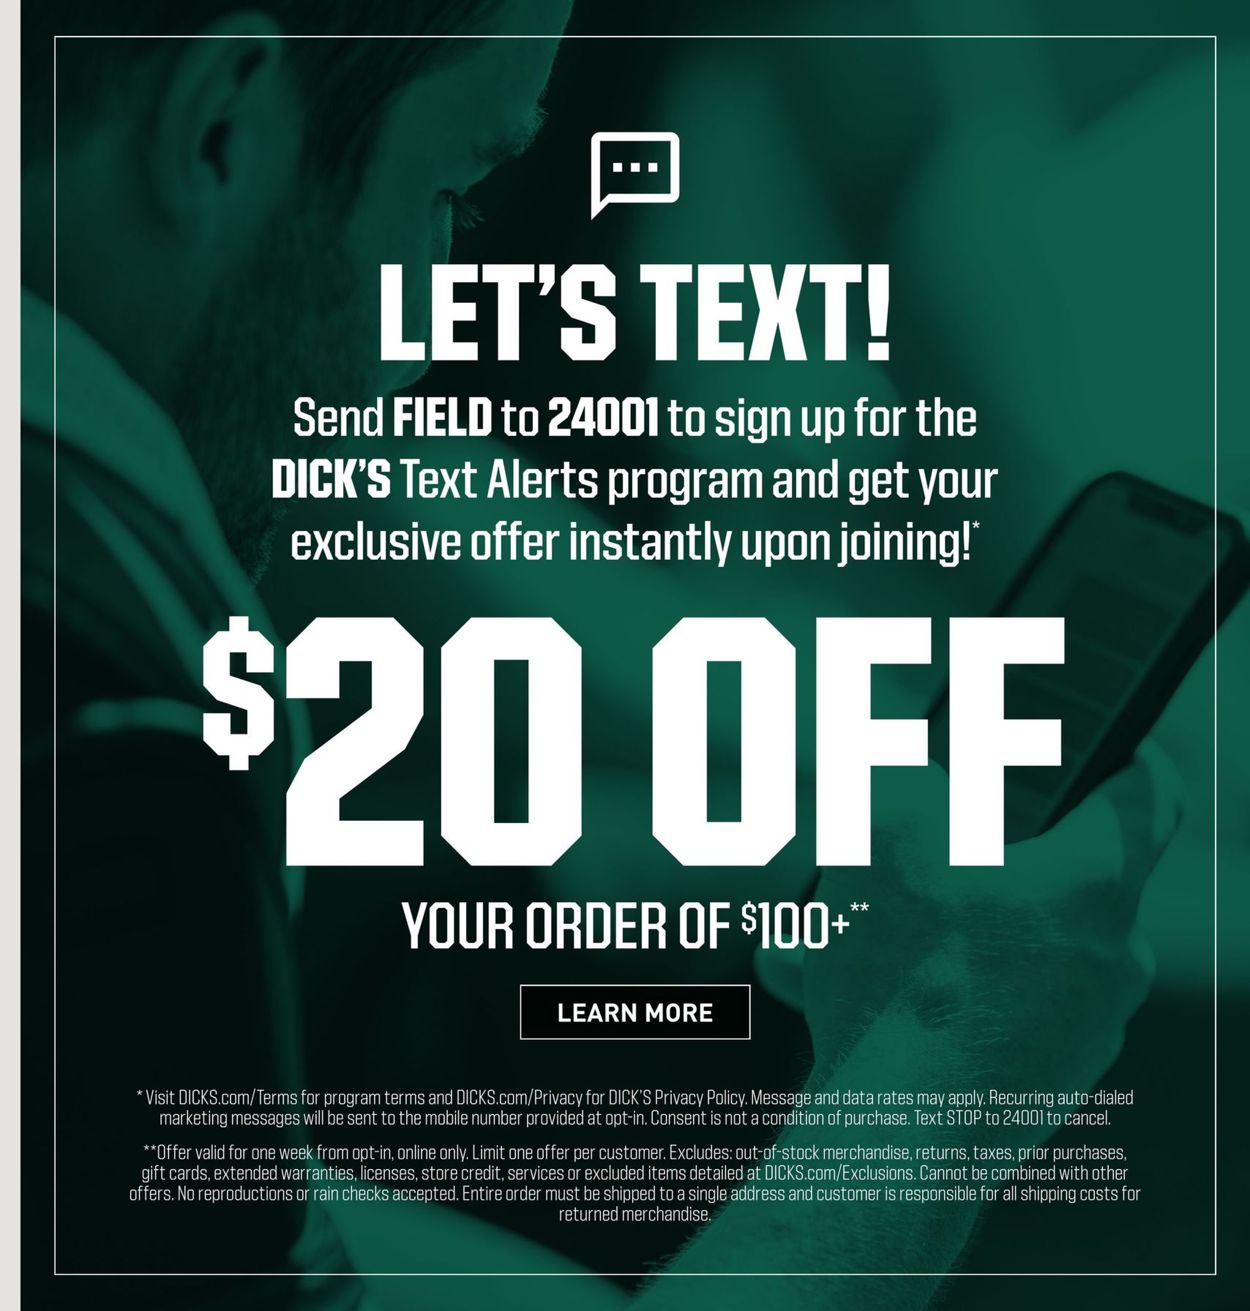 Dick's Ad from 12/01/2019